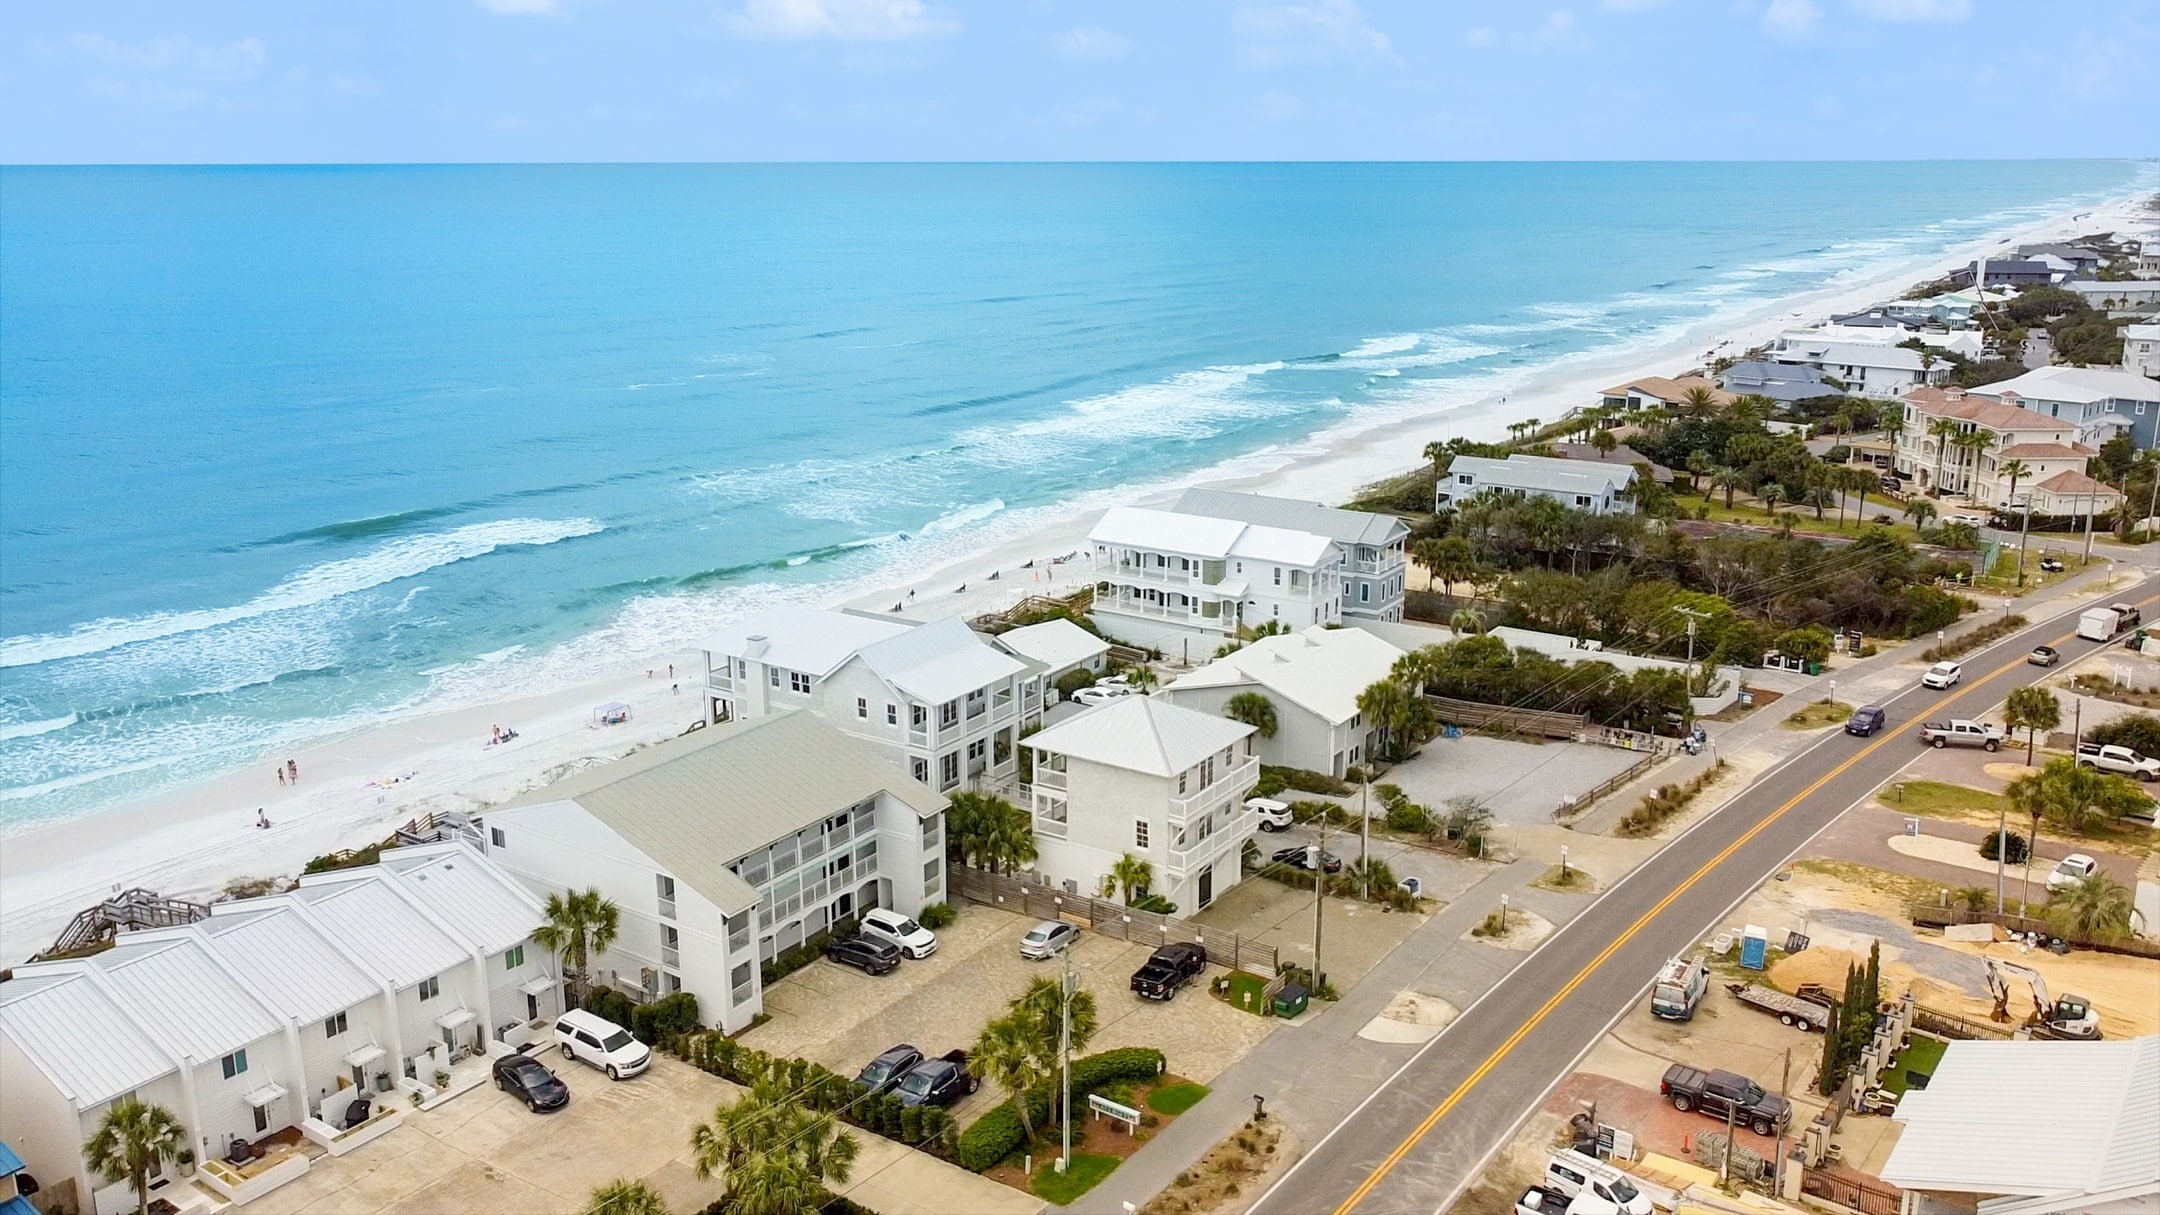 Oceanfront property for a perfect beach vacation.